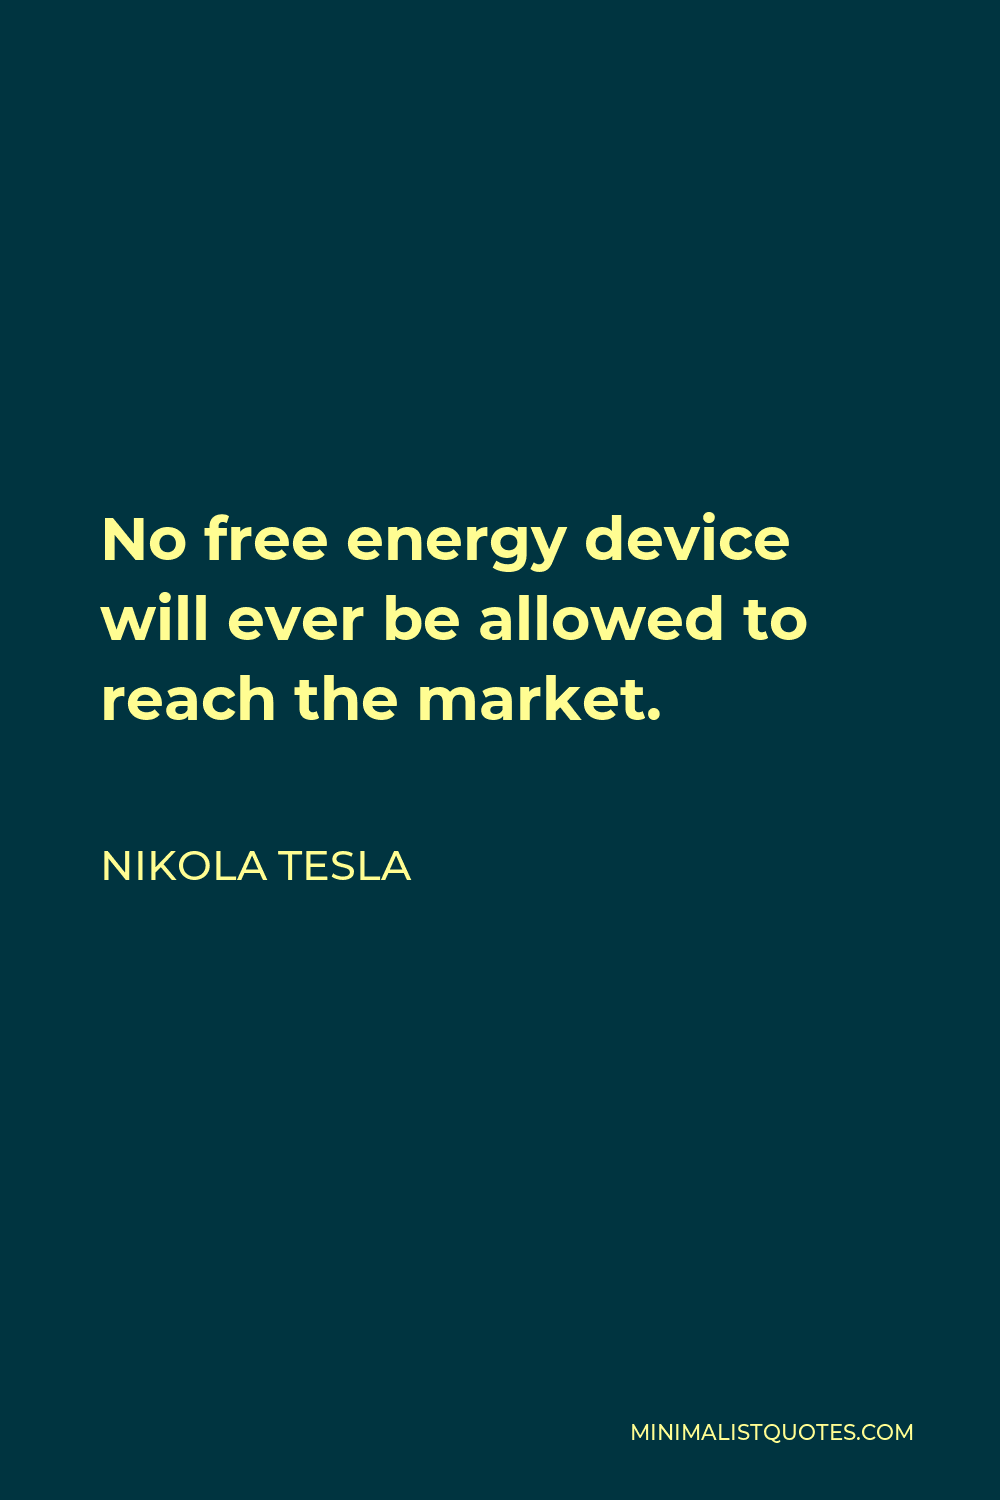 Nikola Tesla Quote - No free energy device will ever be allowed to reach the market.